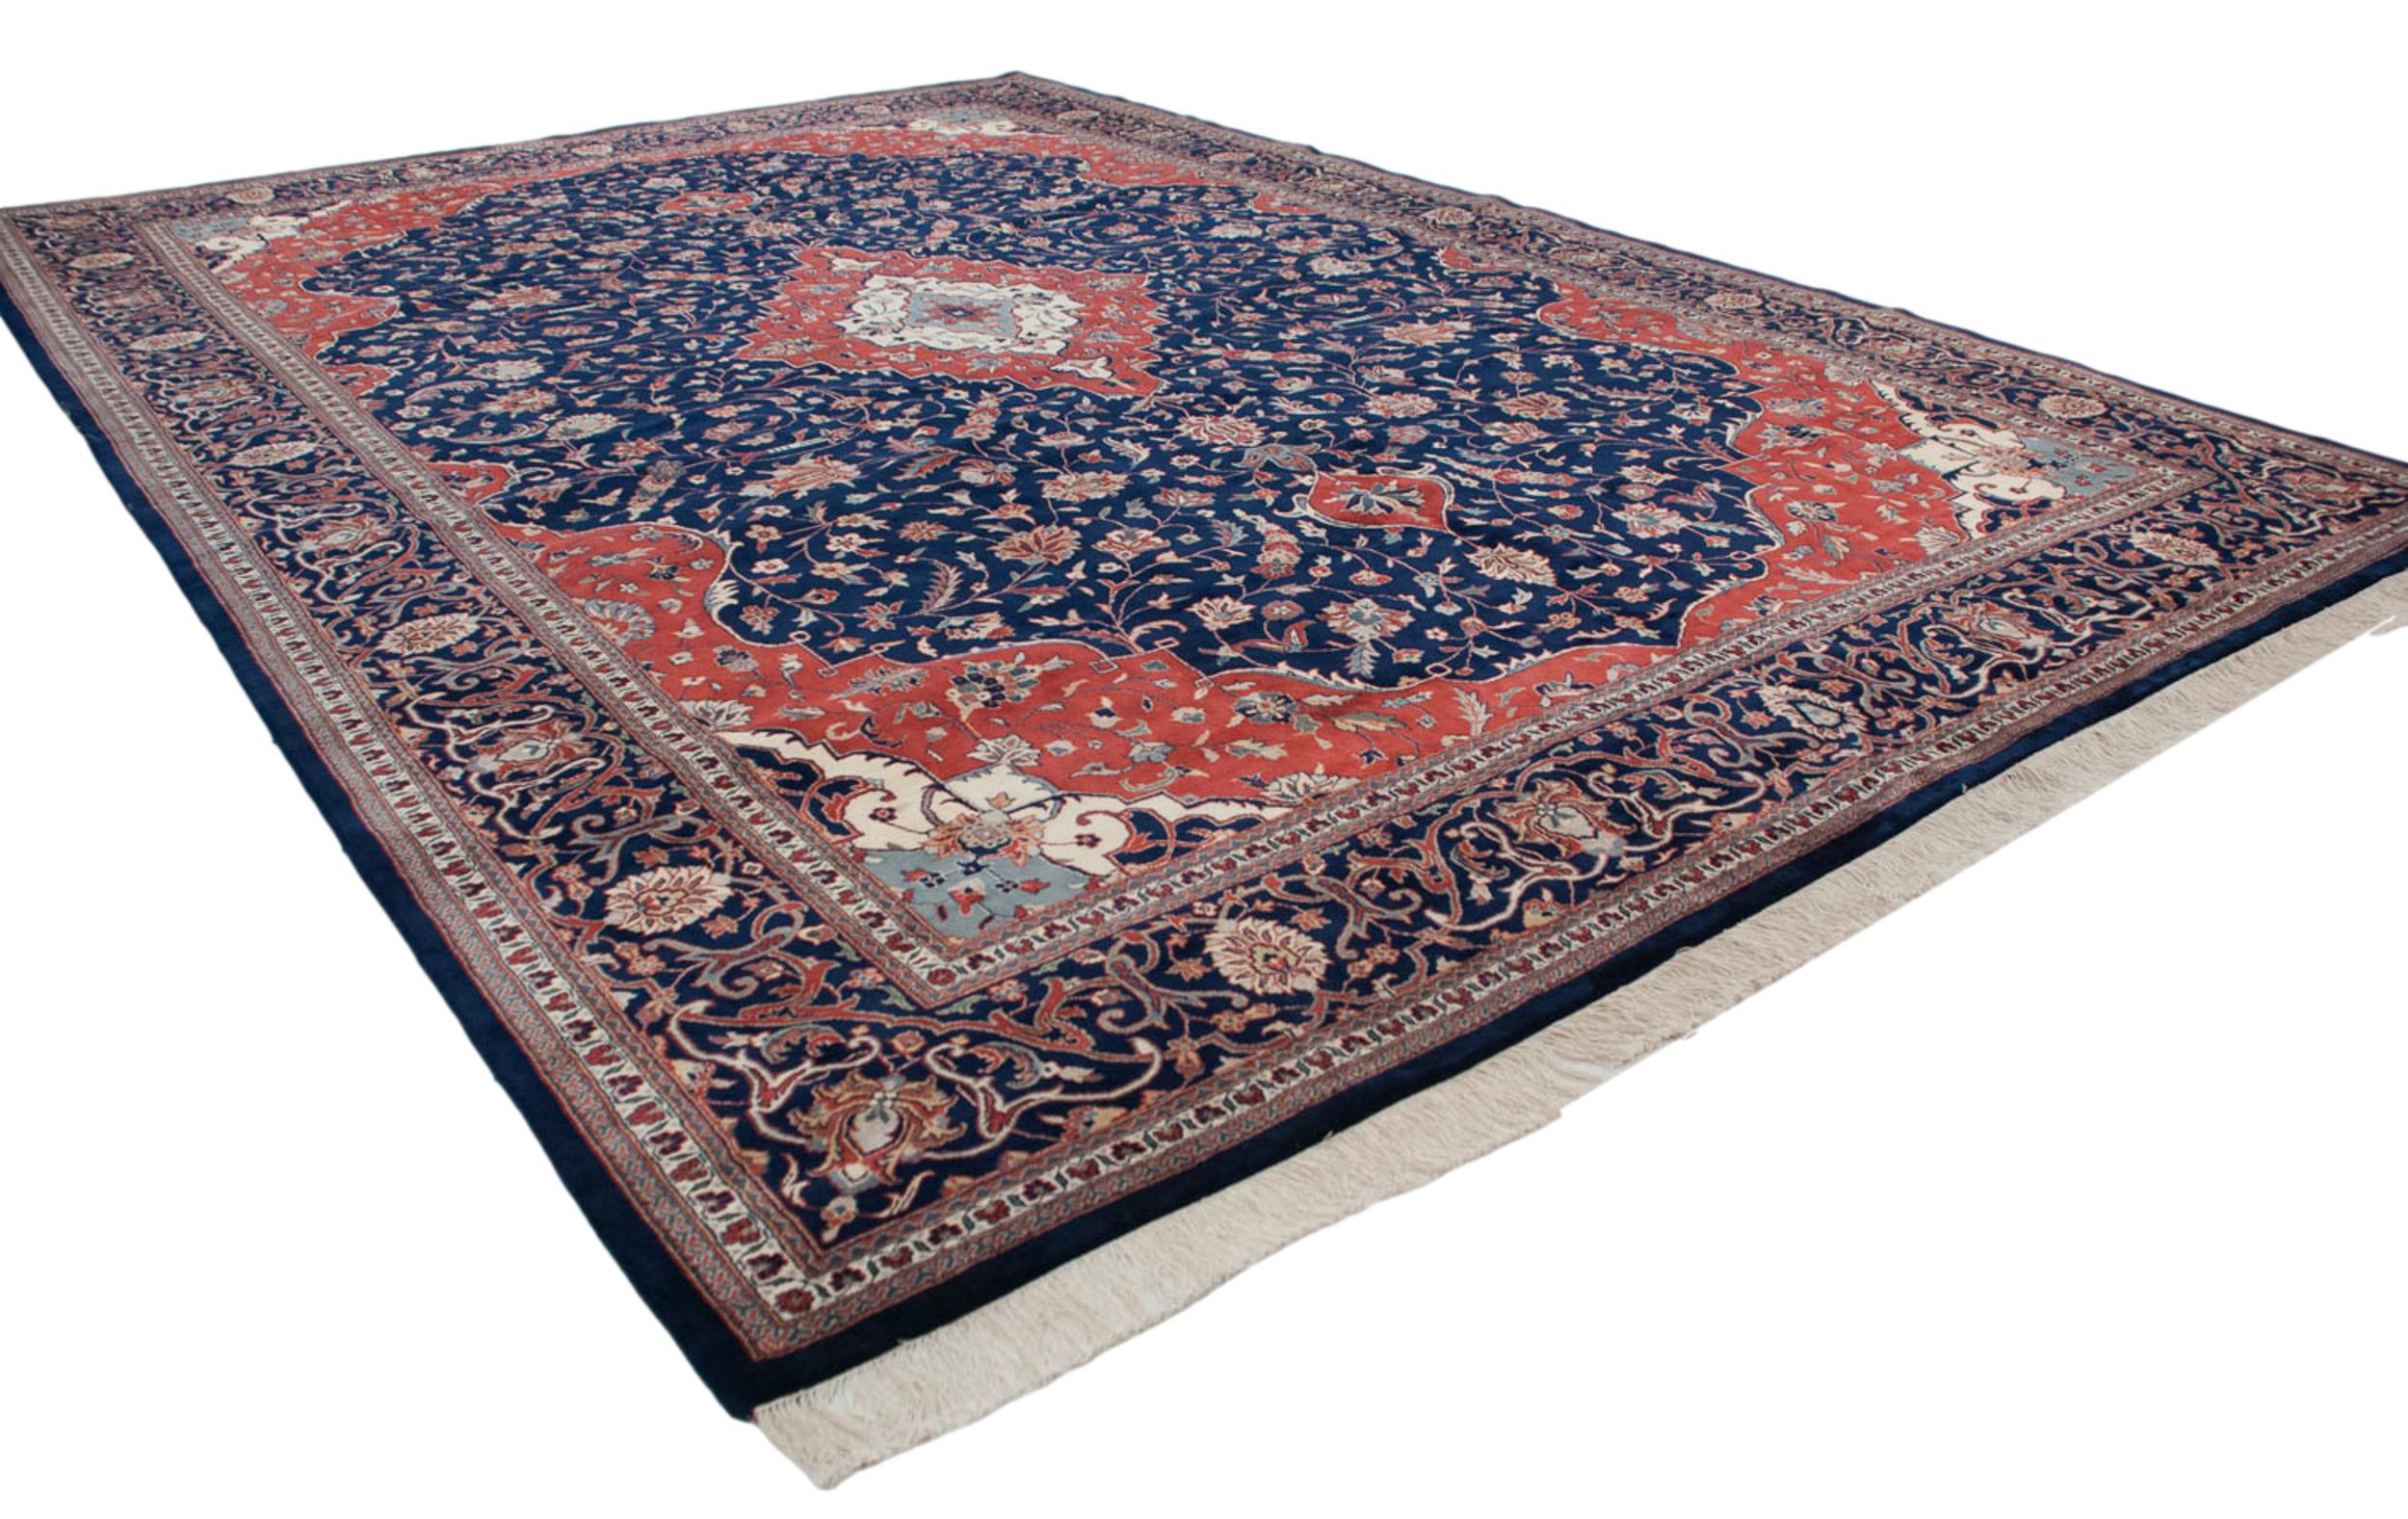 Vintage Indian Kashan Design Carpet In Excellent Condition For Sale In Katonah, NY